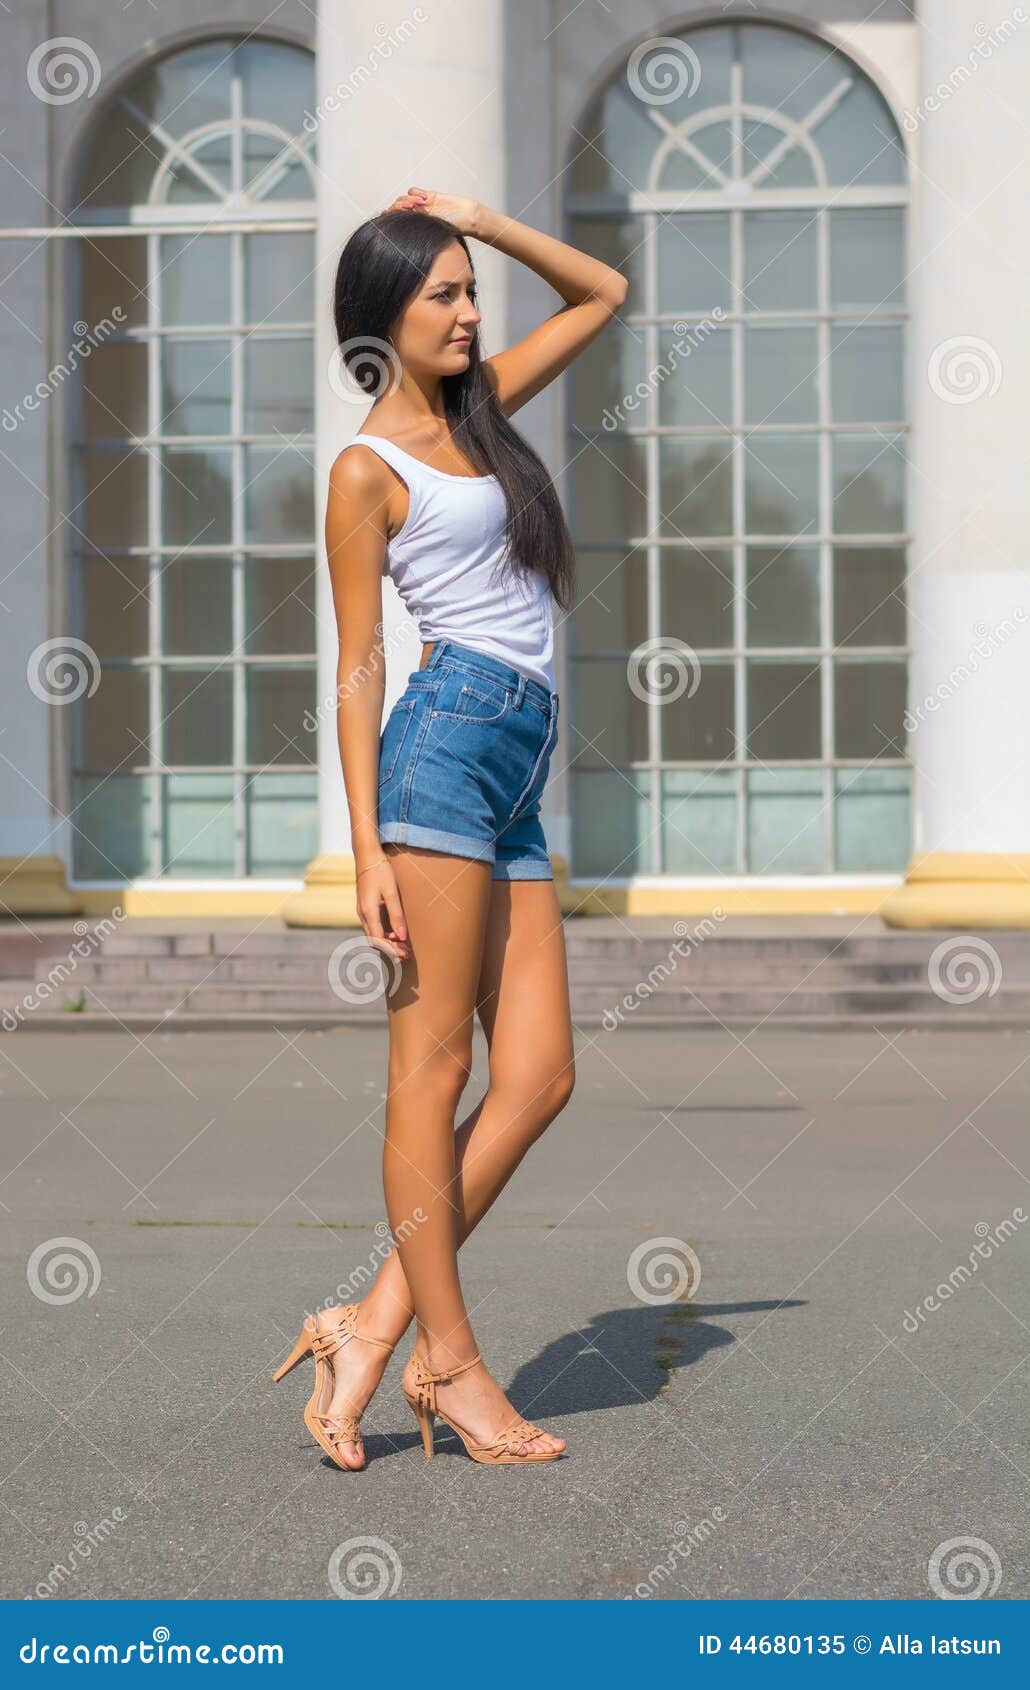 Girl In A T-shirt And Shorts In Front Of A Building With Columns Stock
Image - Image of building